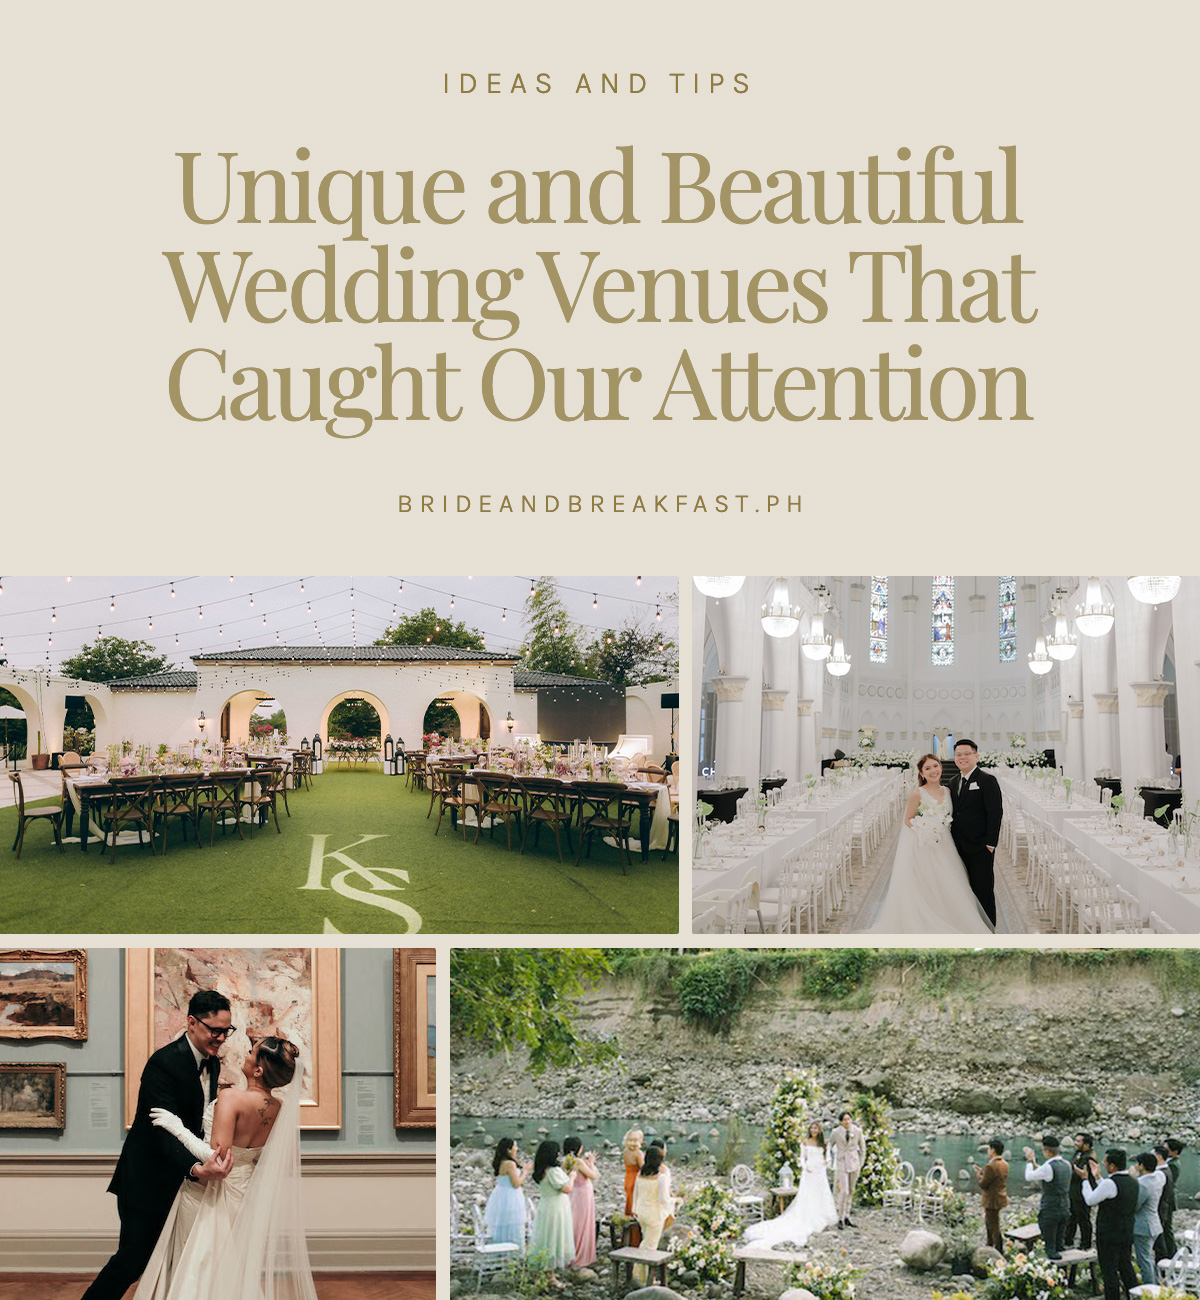 Unique and Beautiful Wedding Venues That Caught Our Attention